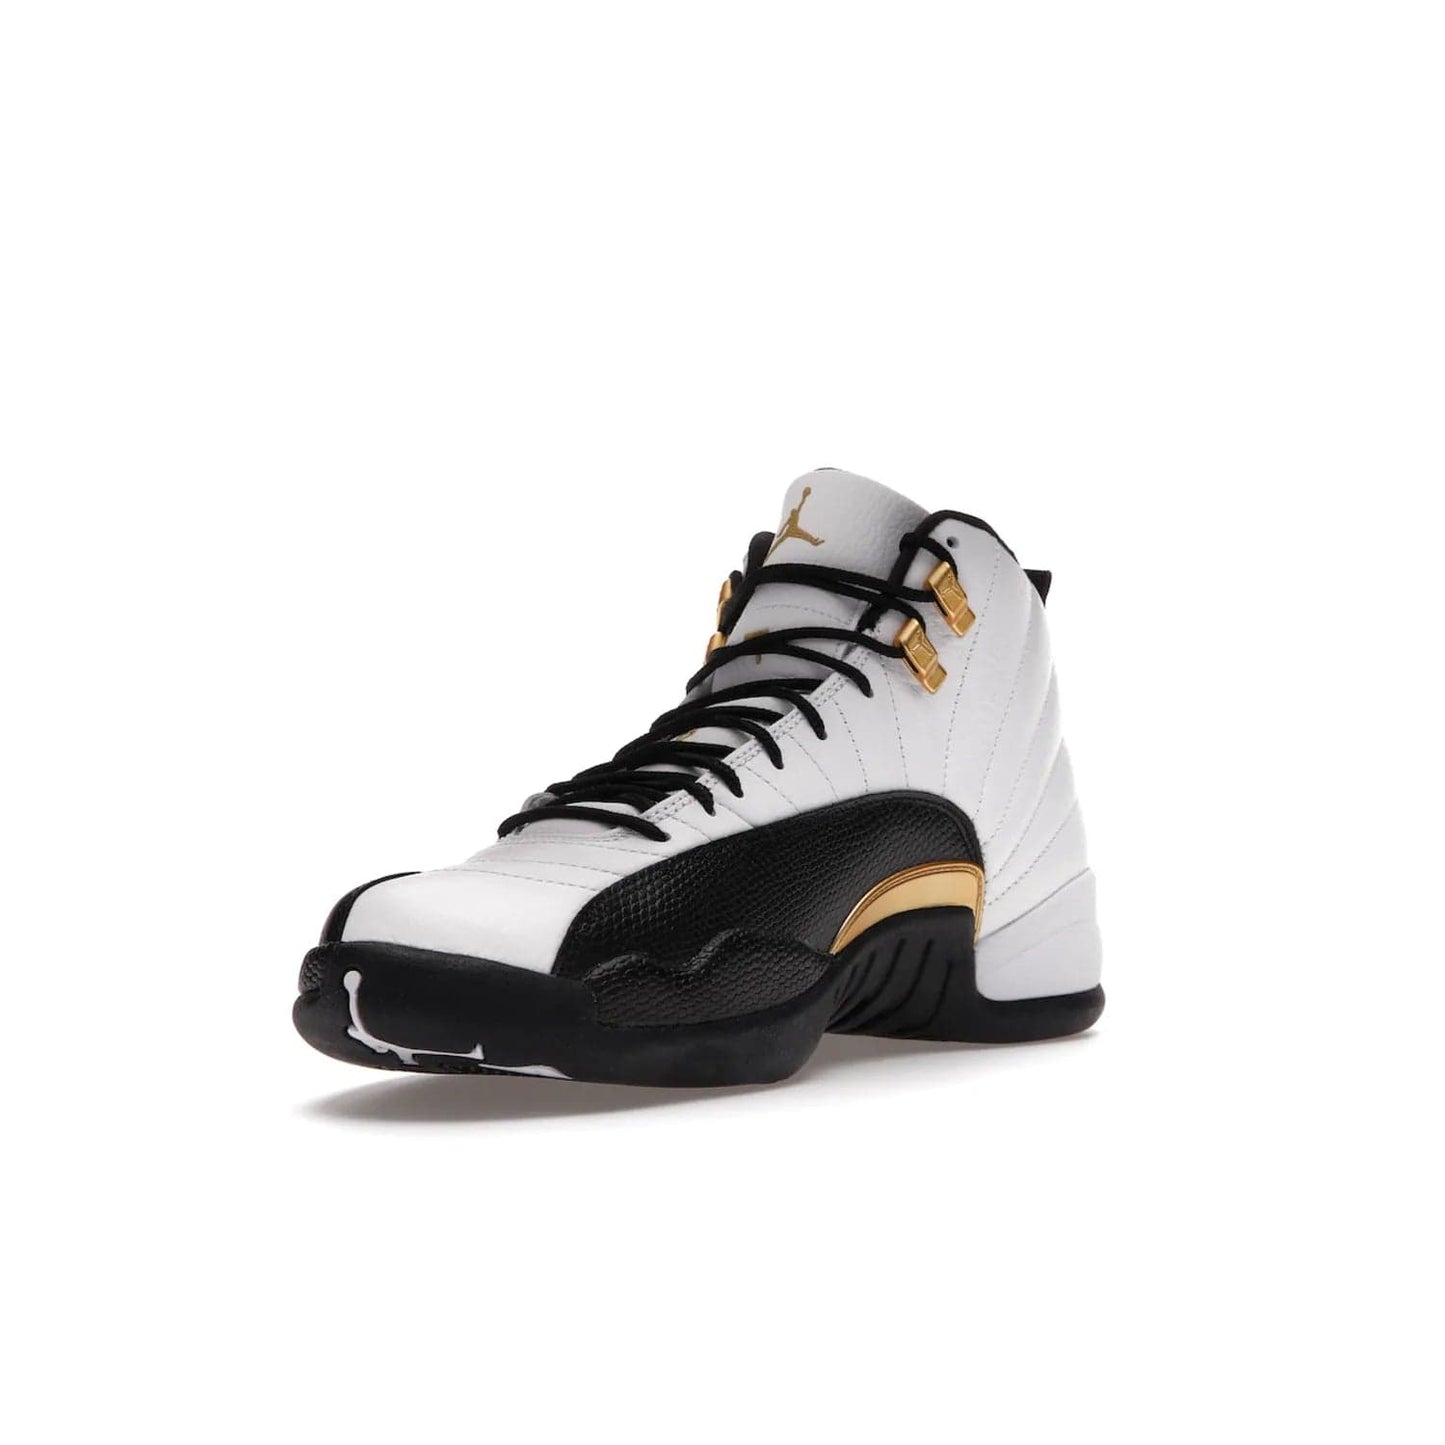 Jordan 12 Retro Royalty Taxi - Image 14 - Only at www.BallersClubKickz.com - Make a statement with the Air Jordan 12 Retro Royalty Taxi. Woven heel tag, gold plaquet, white tumbled leather upper plus a black toe wrap, make this modern take on the classic a must-have. Available in November 2021.